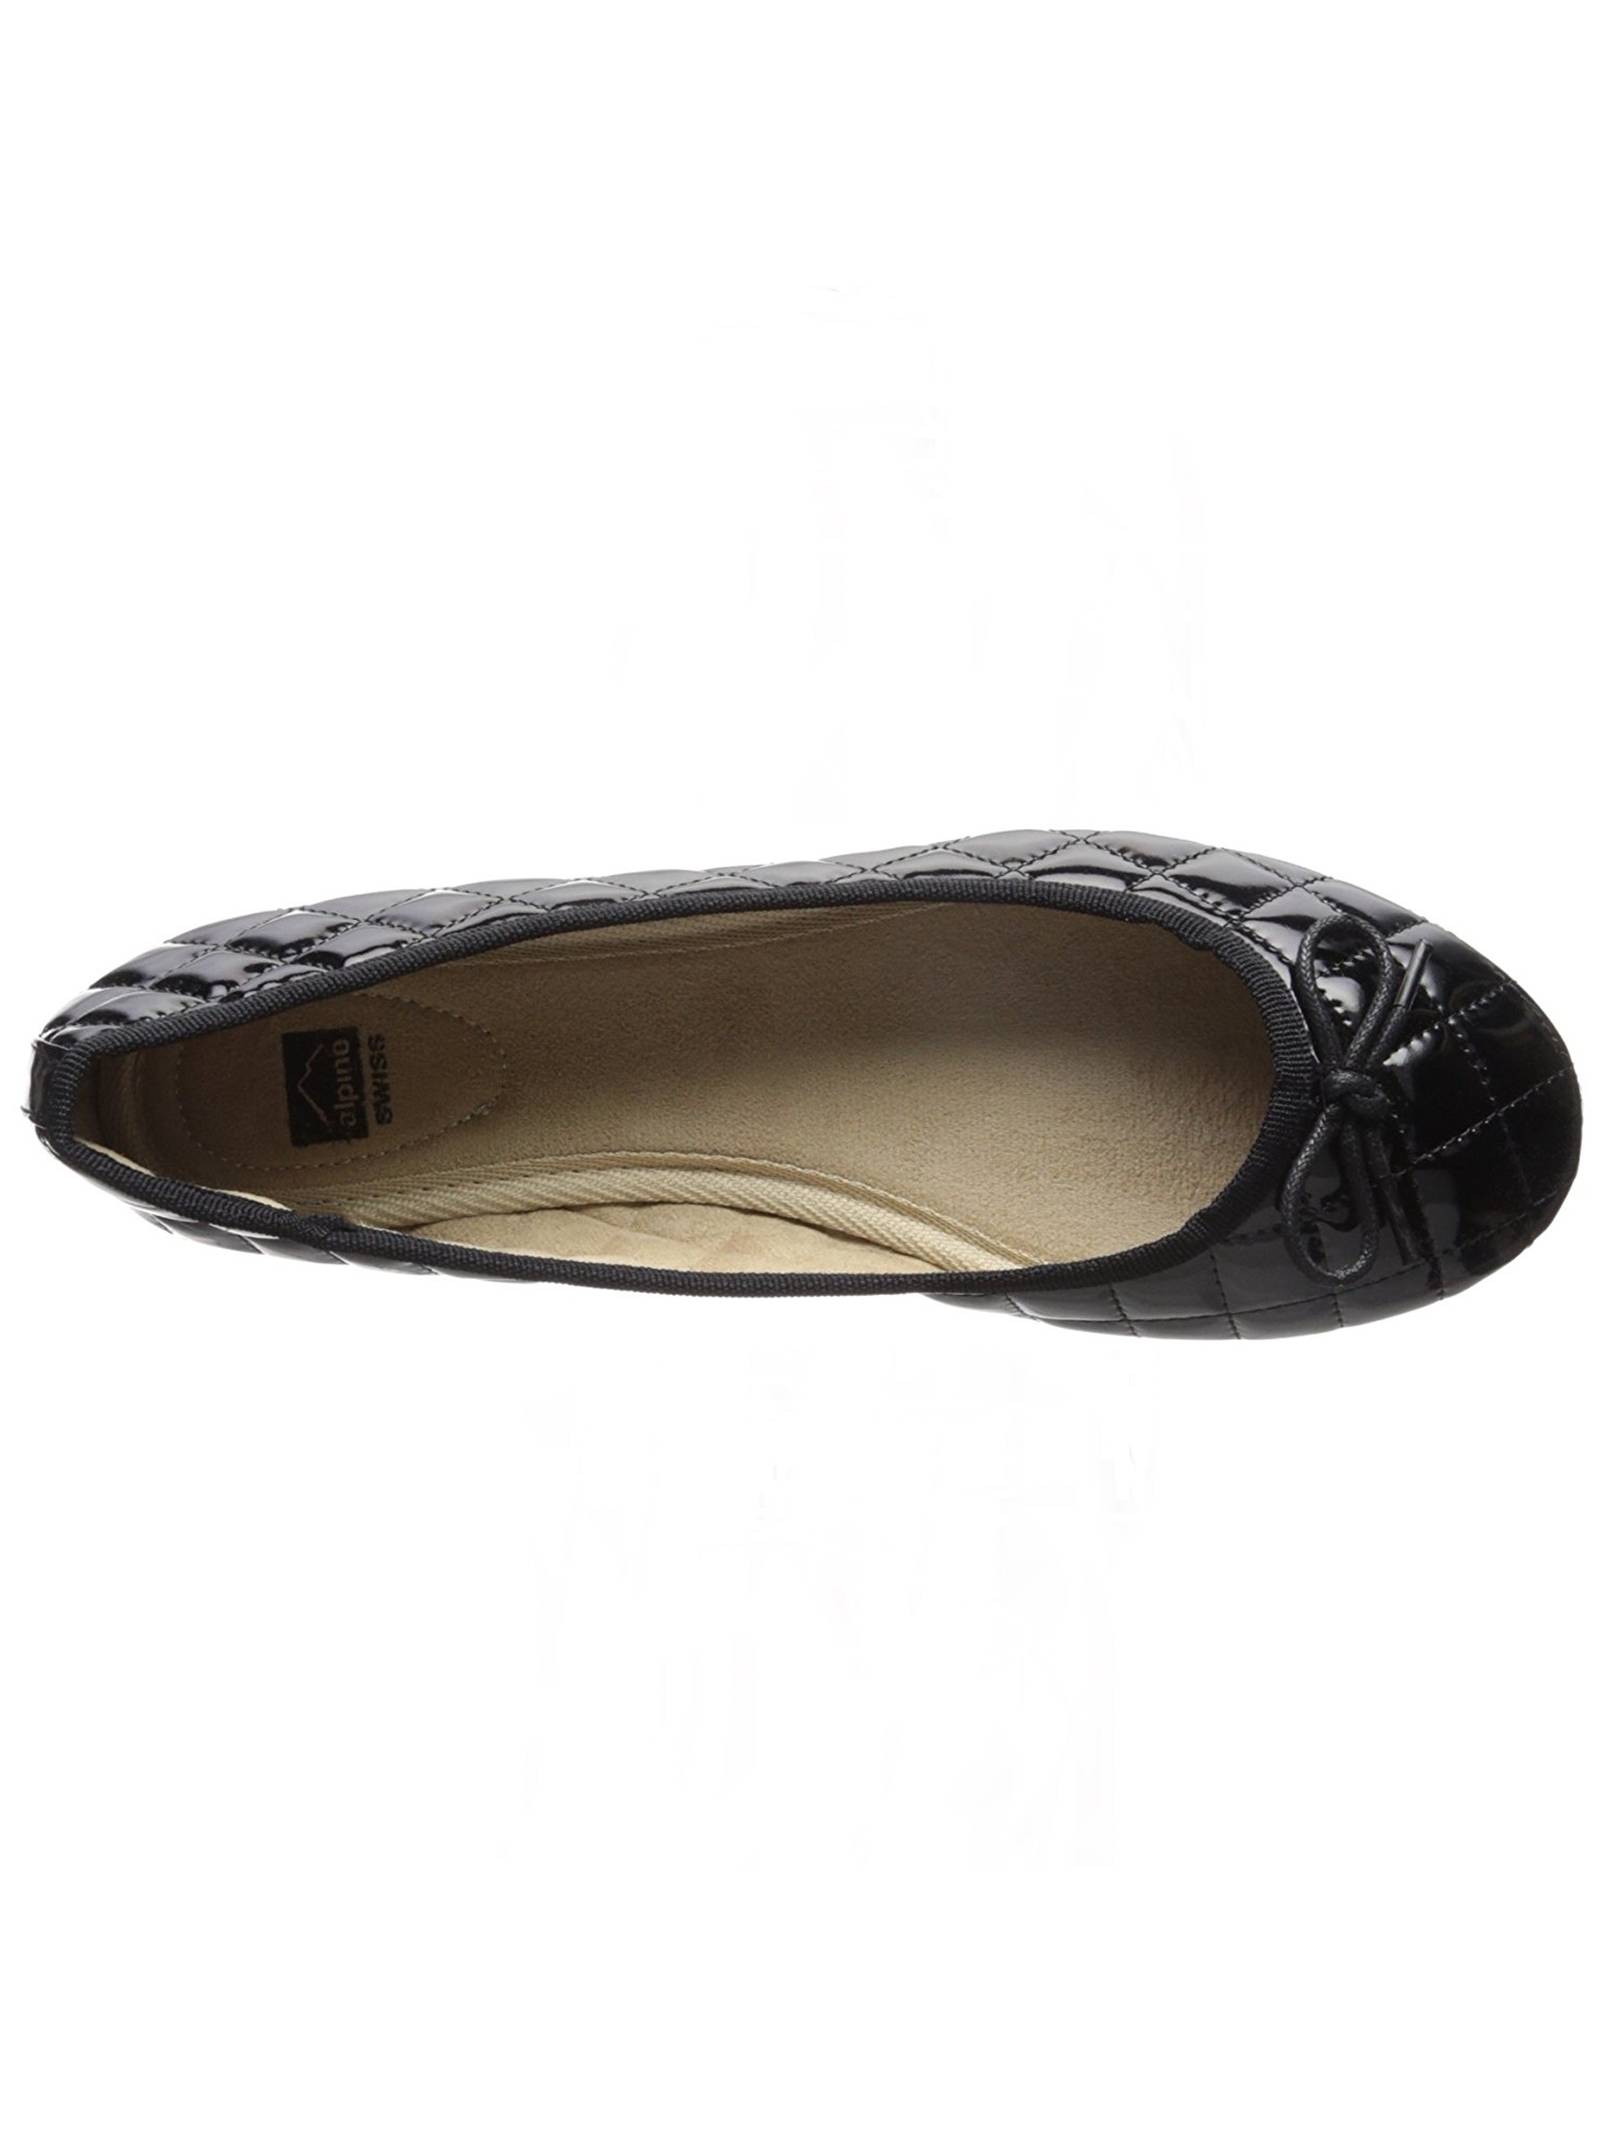 Alpine Swiss Aster Womens Comfort Ballet Flats Faux Patent Leather Slip On Shoes - image 5 of 7